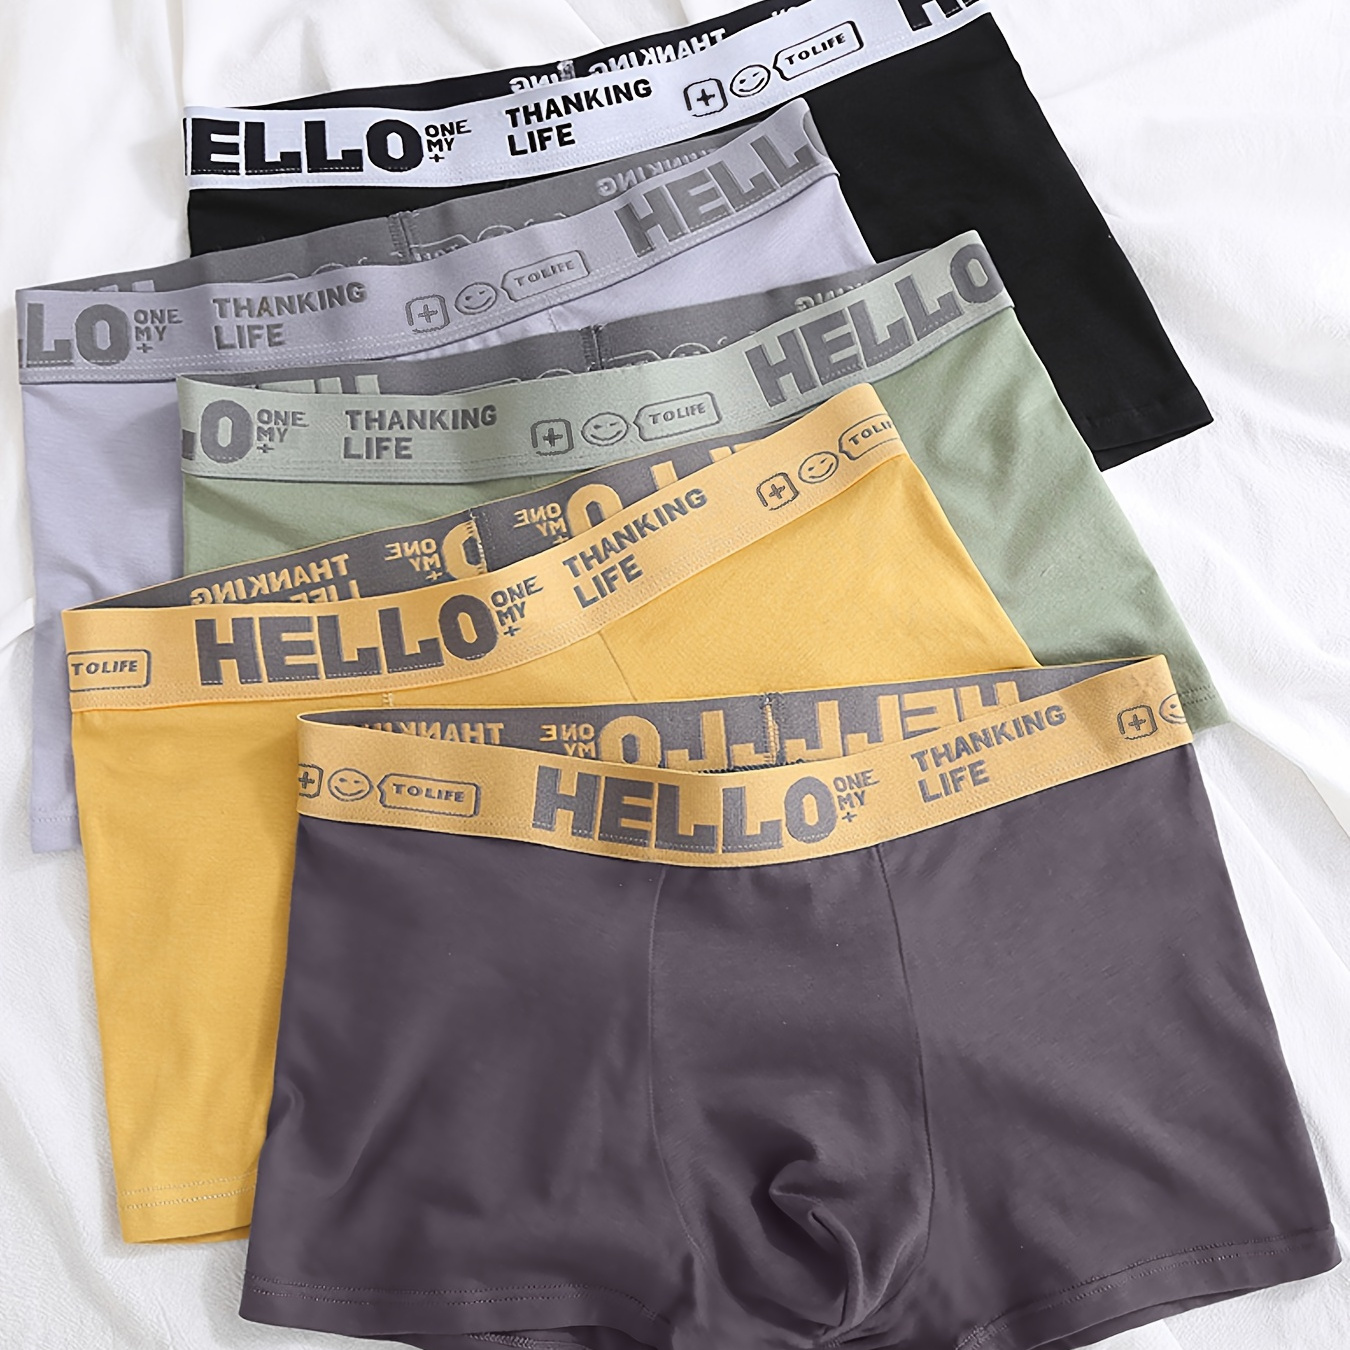 

5pcs Men's Underwear, 'hello' Print Fashion Breathable Comfy Stretchy Boxer Briefs Shorts, Male Underpants For Home & Daily Wear